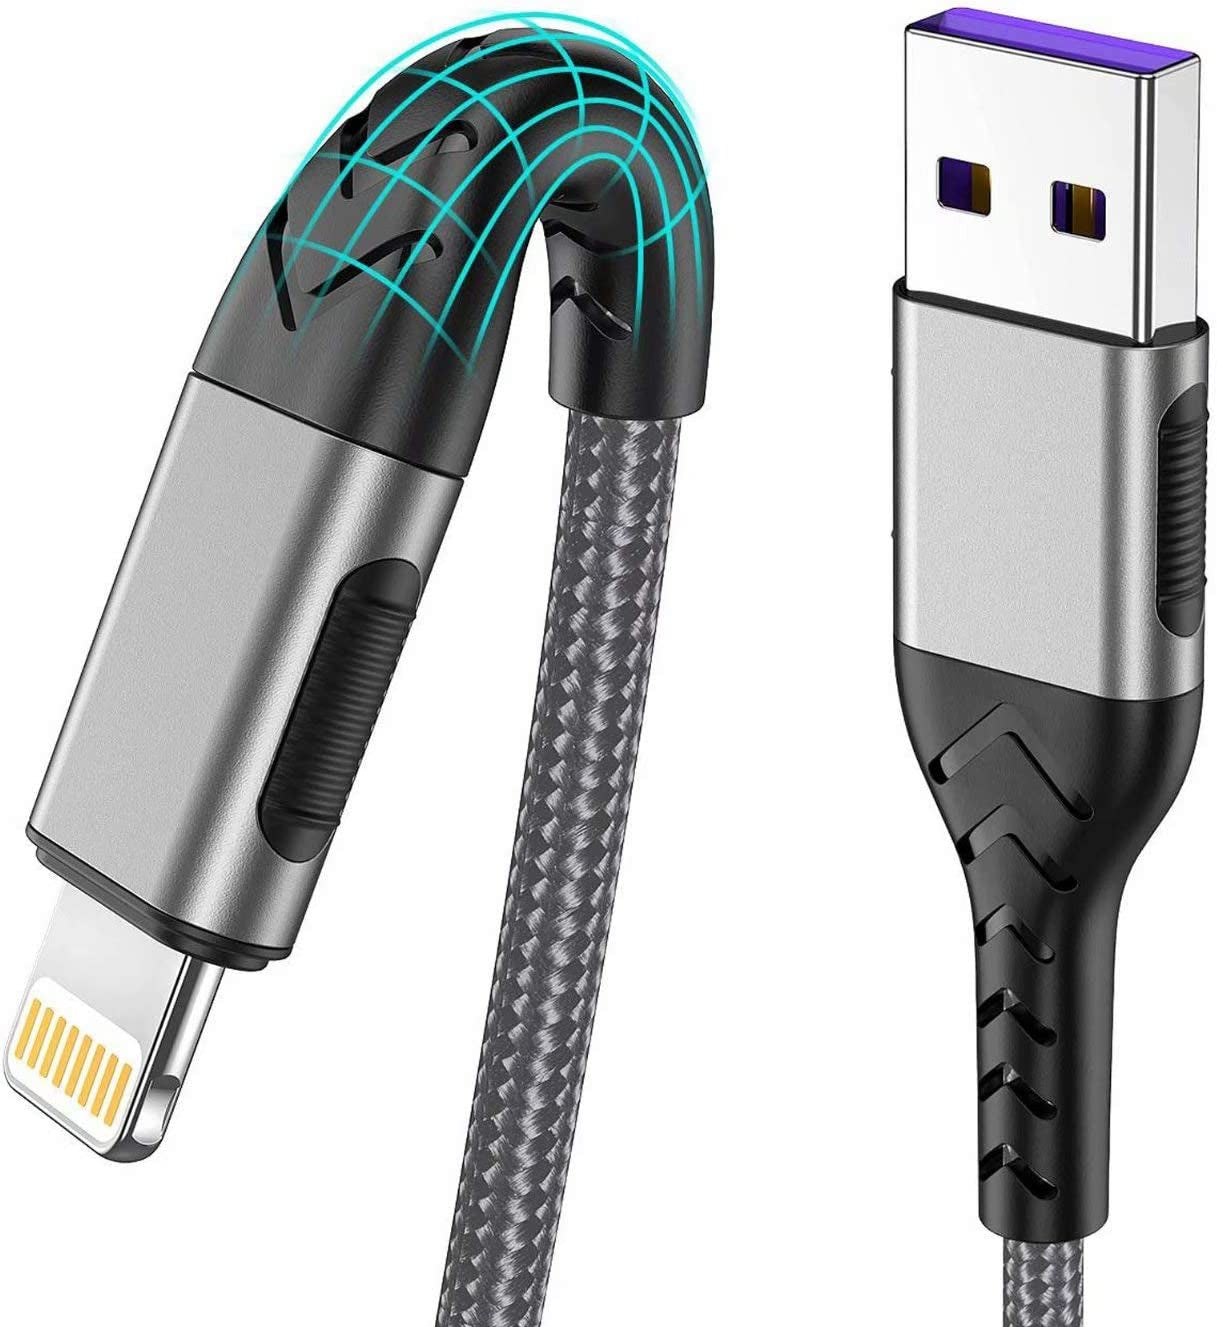 Set of 3 MFi Certified 10FT USB-A Lightning Charger Cables for iPhone - Fast Charging Cord for iPhone